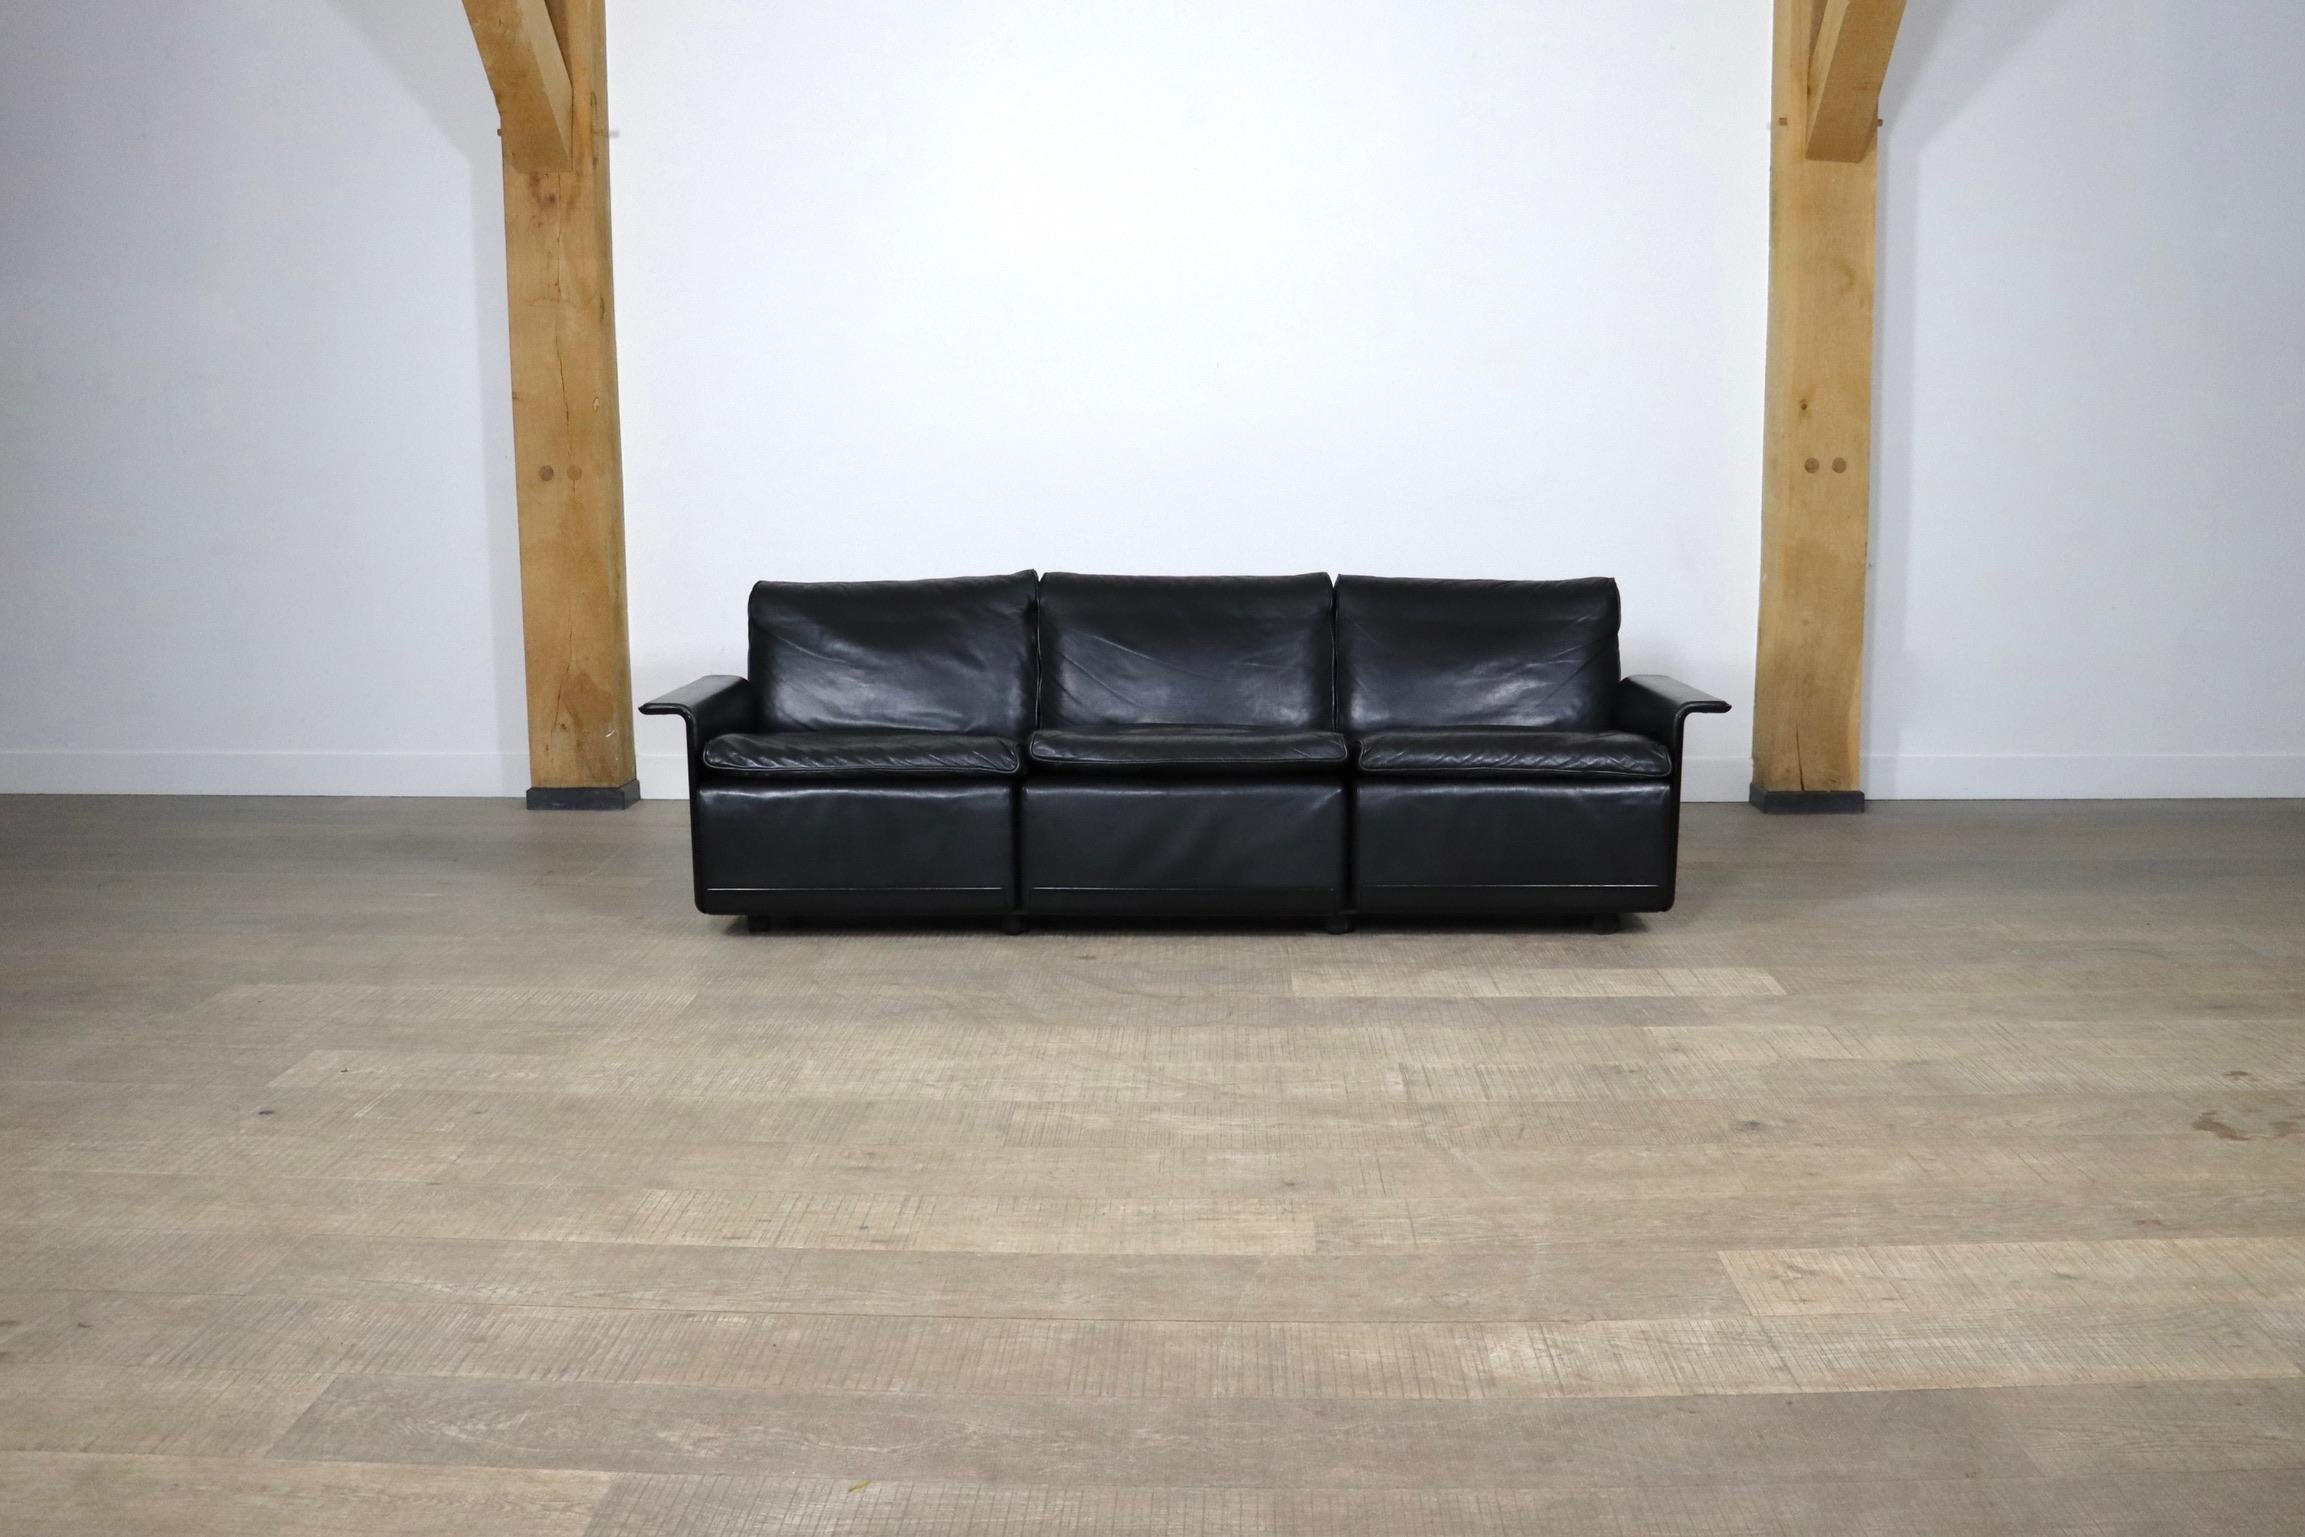 Nice three seater sofa in black leather by Dieter Rams for Vitsoe. The black outer shell is made from a hot-pressed sheet-moulding compound, which is similar to, but stronger than fiberglass. This sofa is made with the highest-quality black leather,